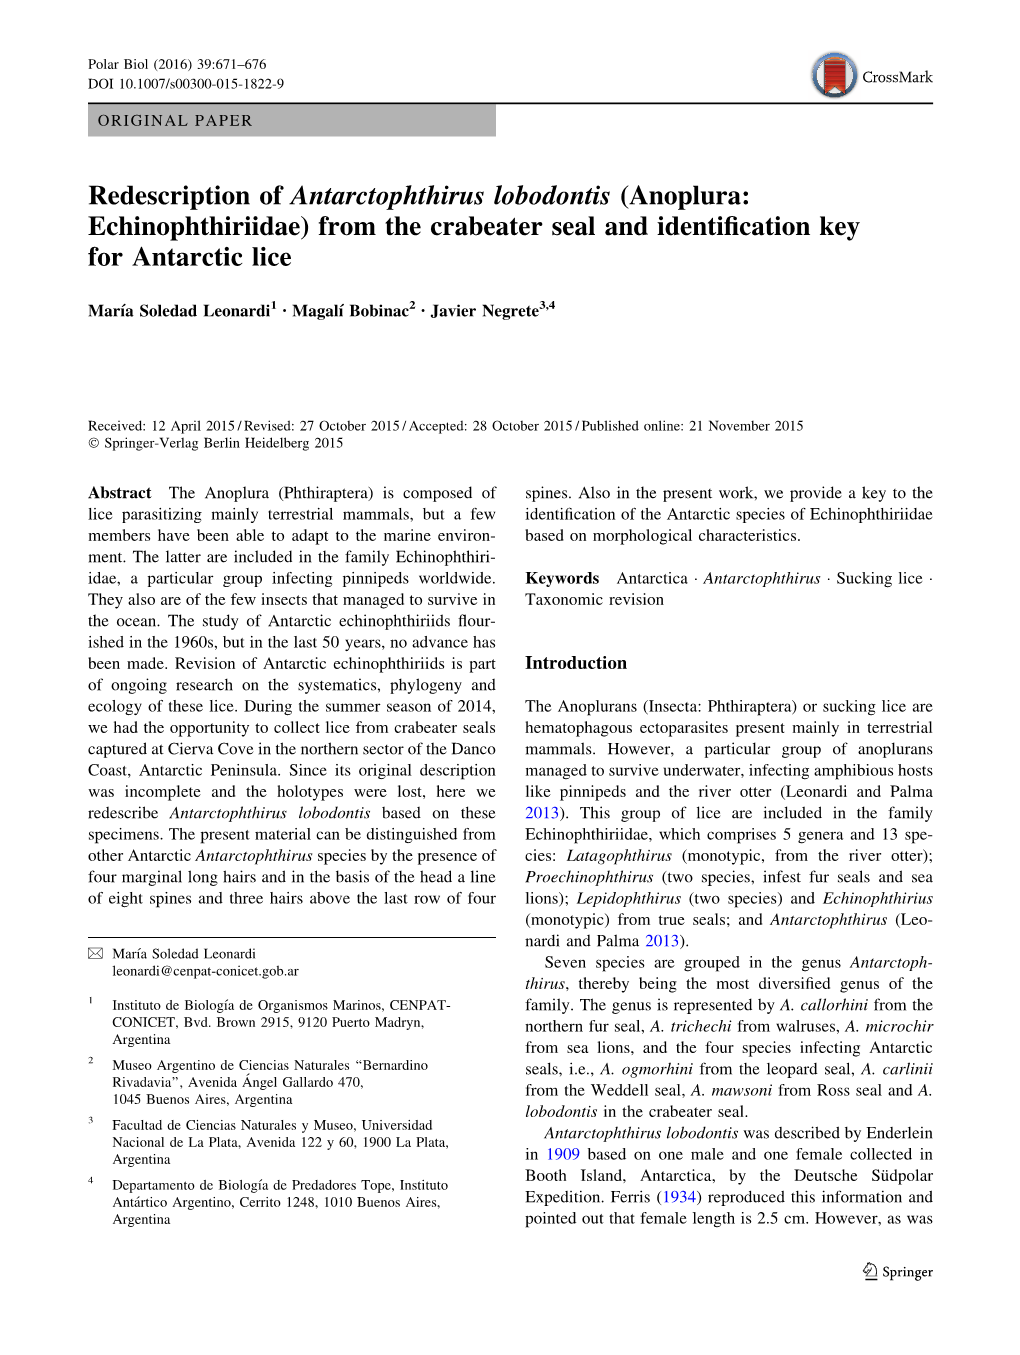 Redescription of Antarctophthirus Lobodontis (Anoplura: Echinophthiriidae) from the Crabeater Seal and Identiﬁcation Key for Antarctic Lice